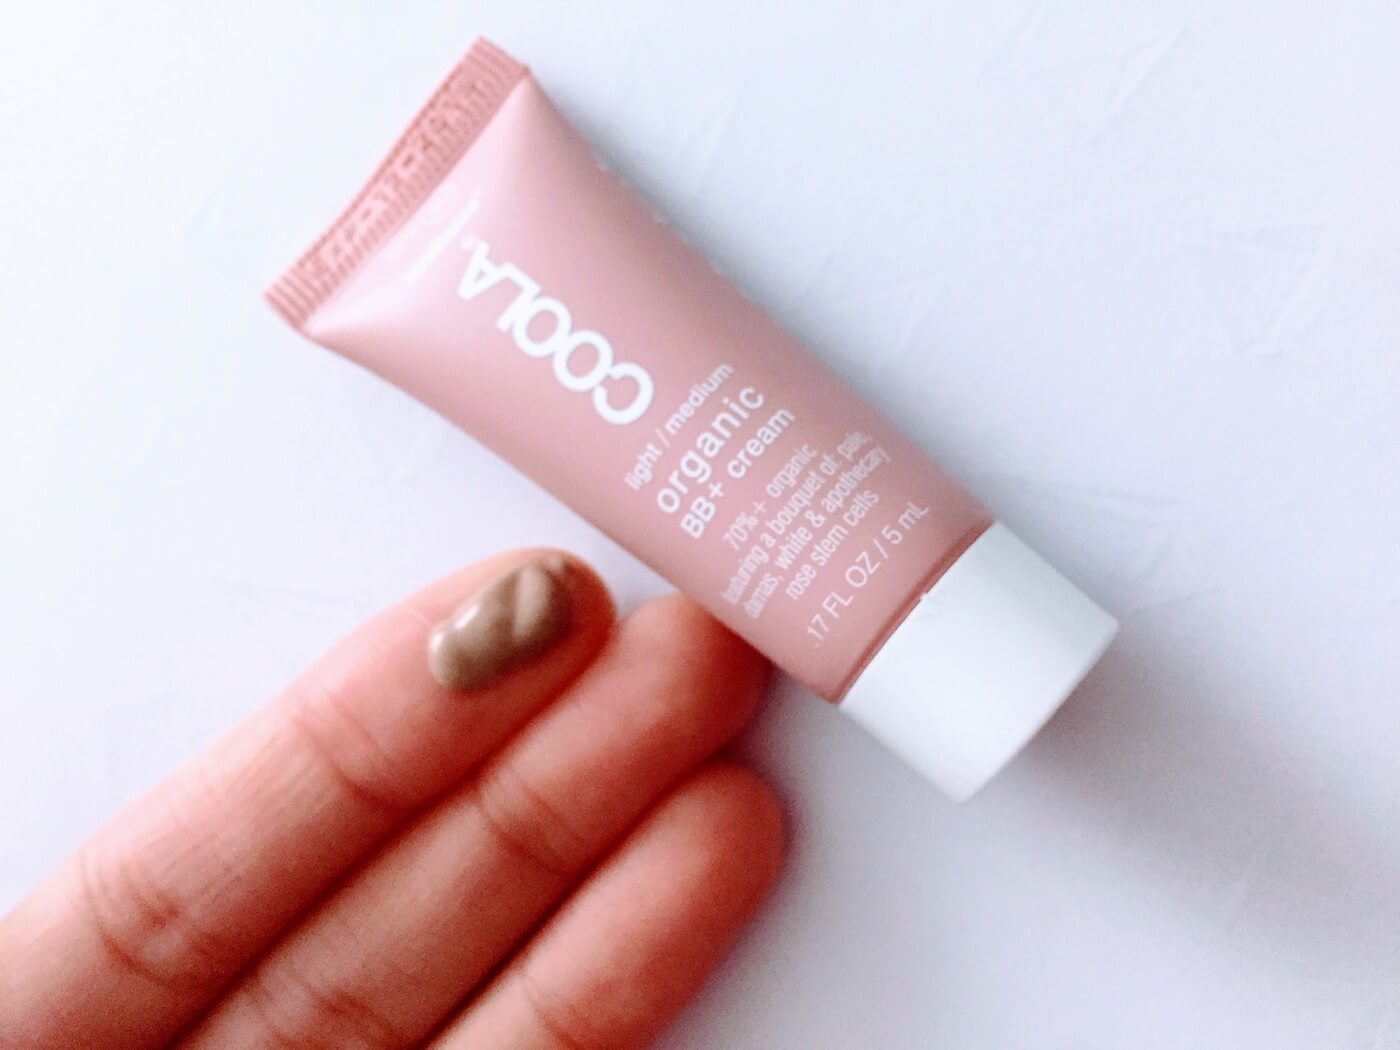 COOLA BB+ Cream Tinted Sunscreen review - tinted texture